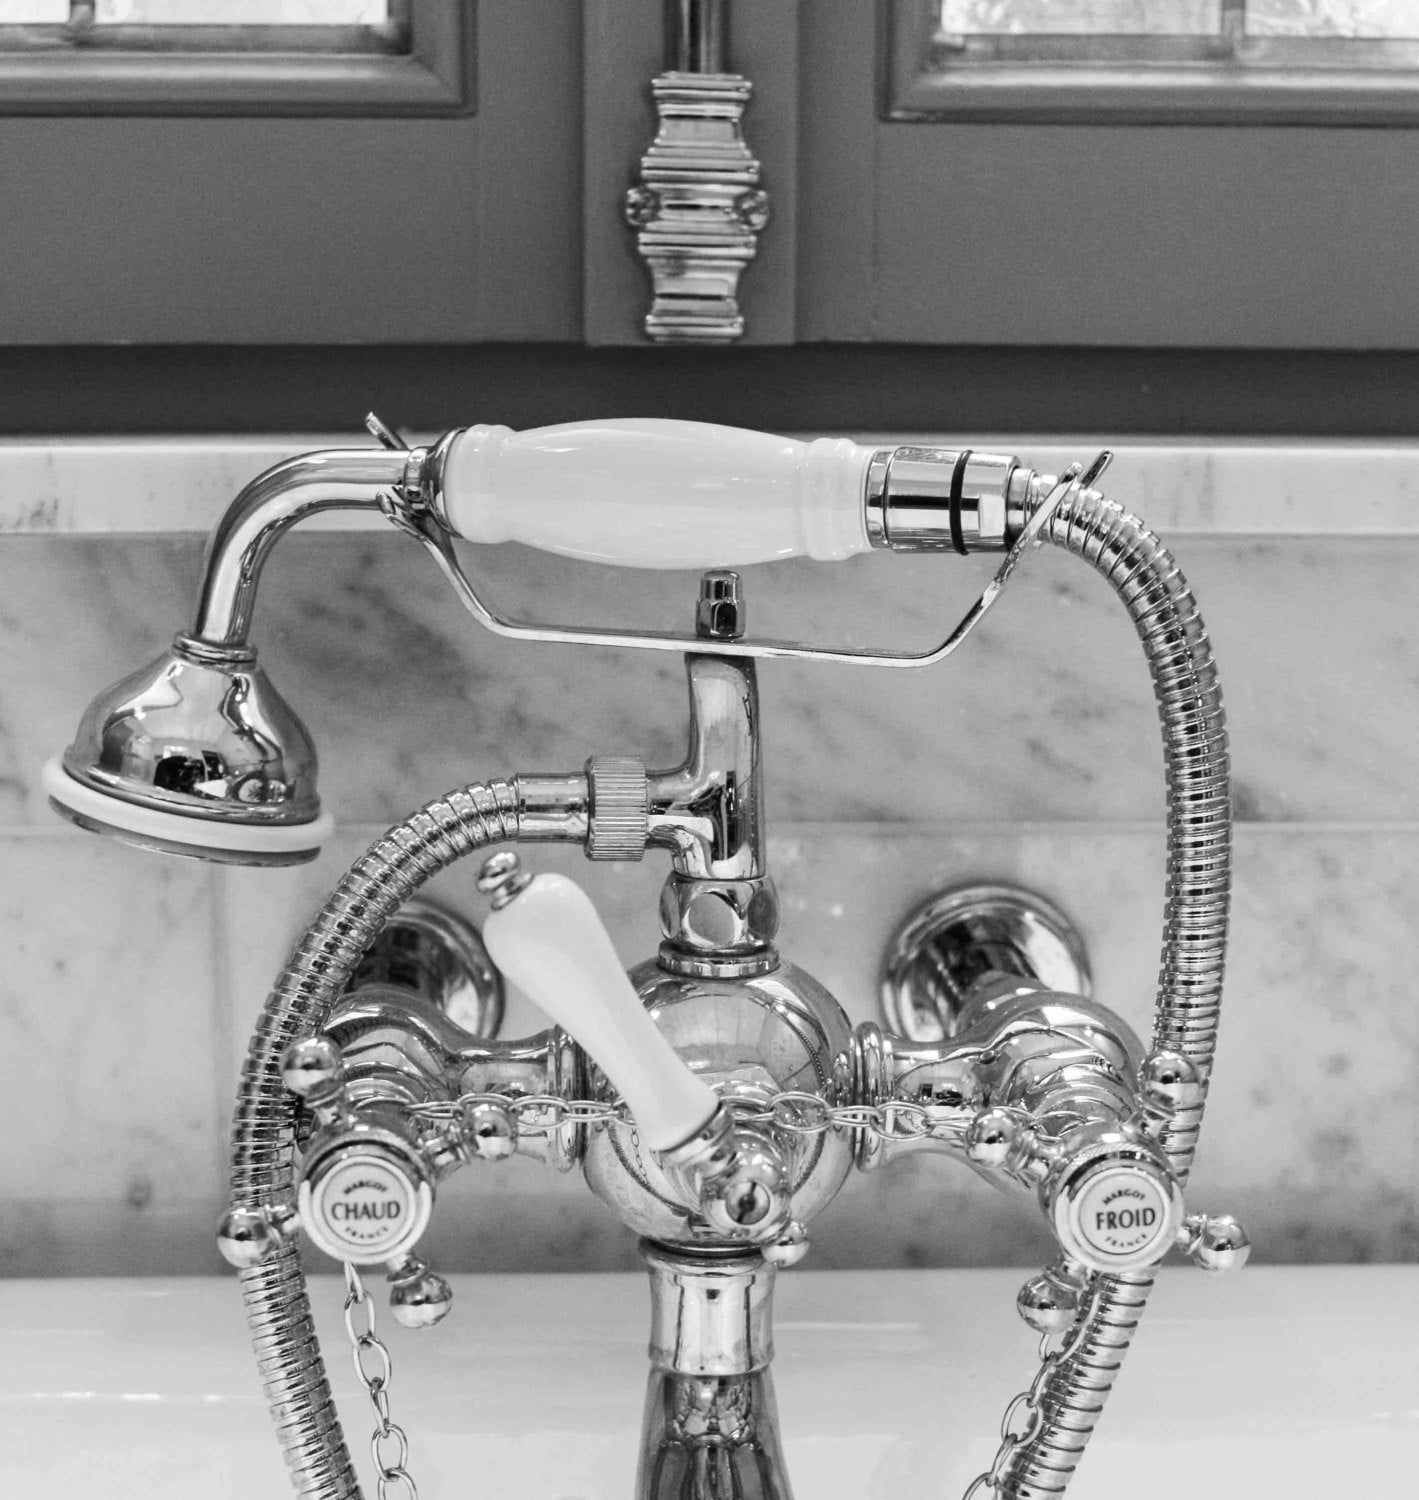 French Hot And Cold Bathroom Faucet Set Of 4 Rebecca Plotnick